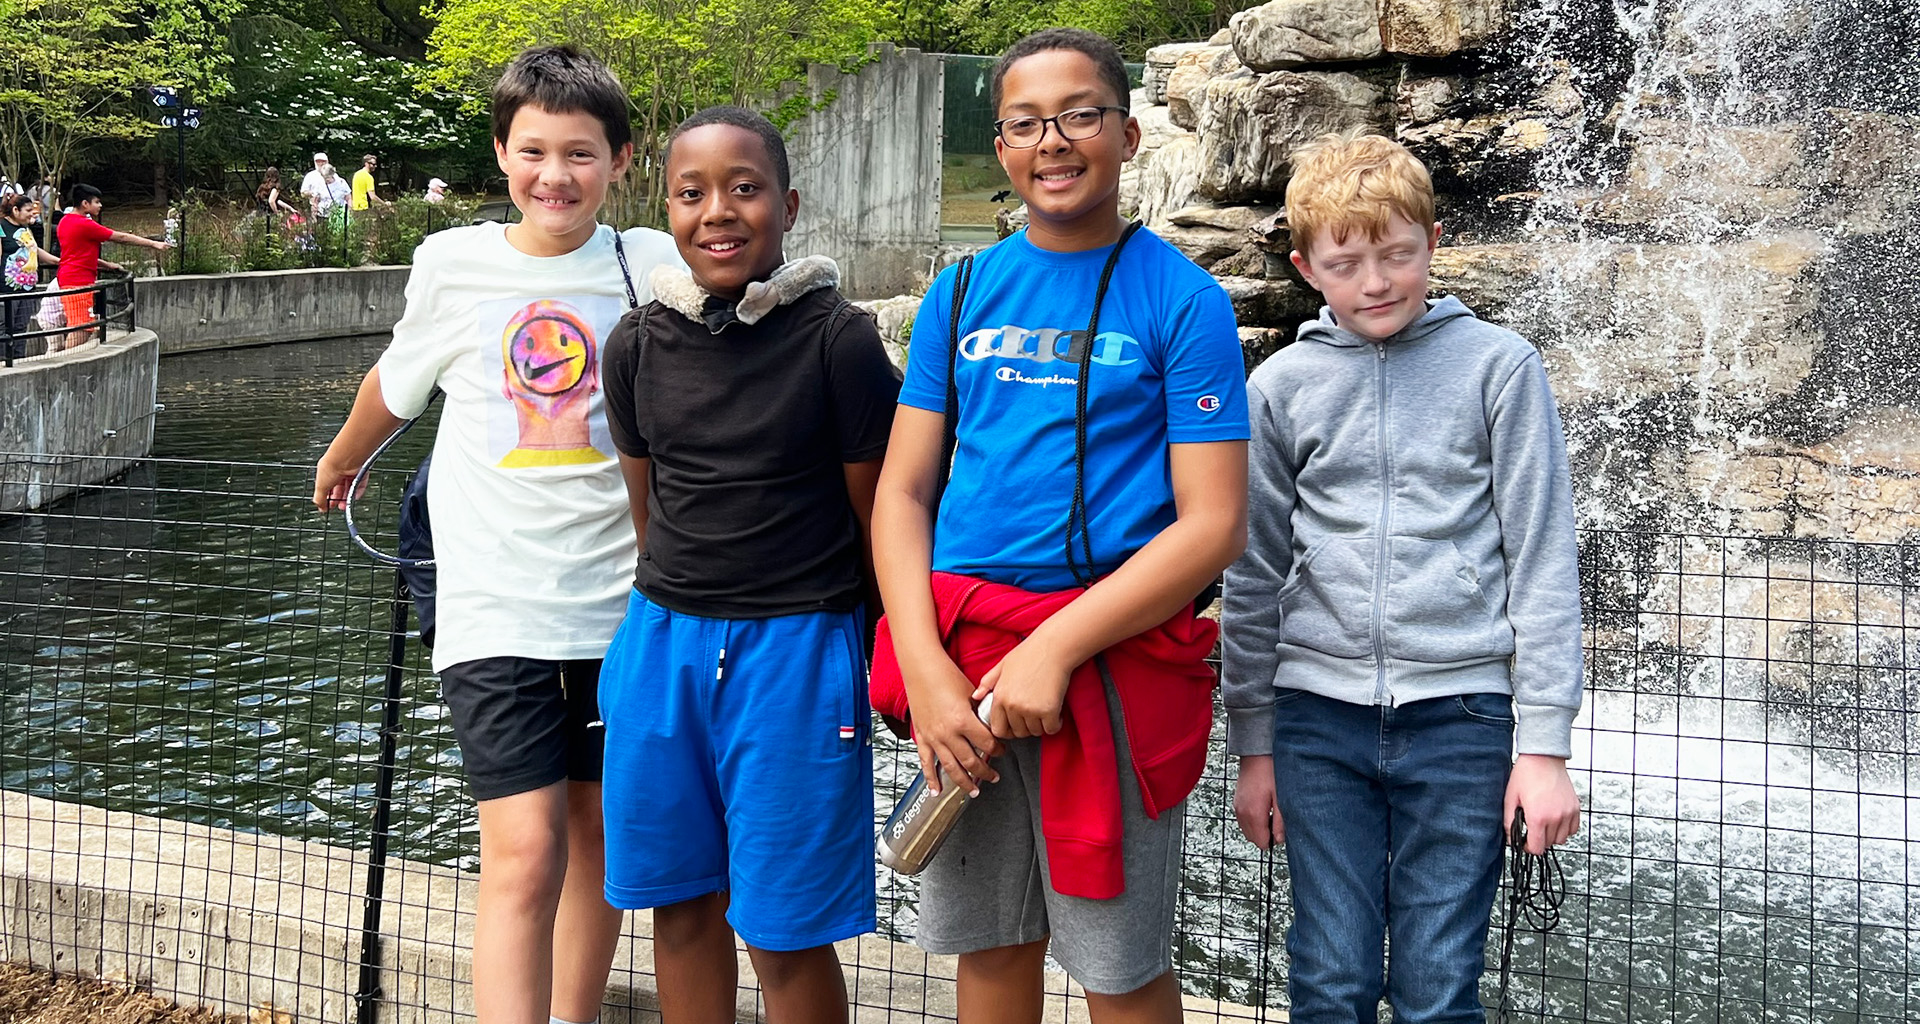 Four students pose on a field trip to the zoo